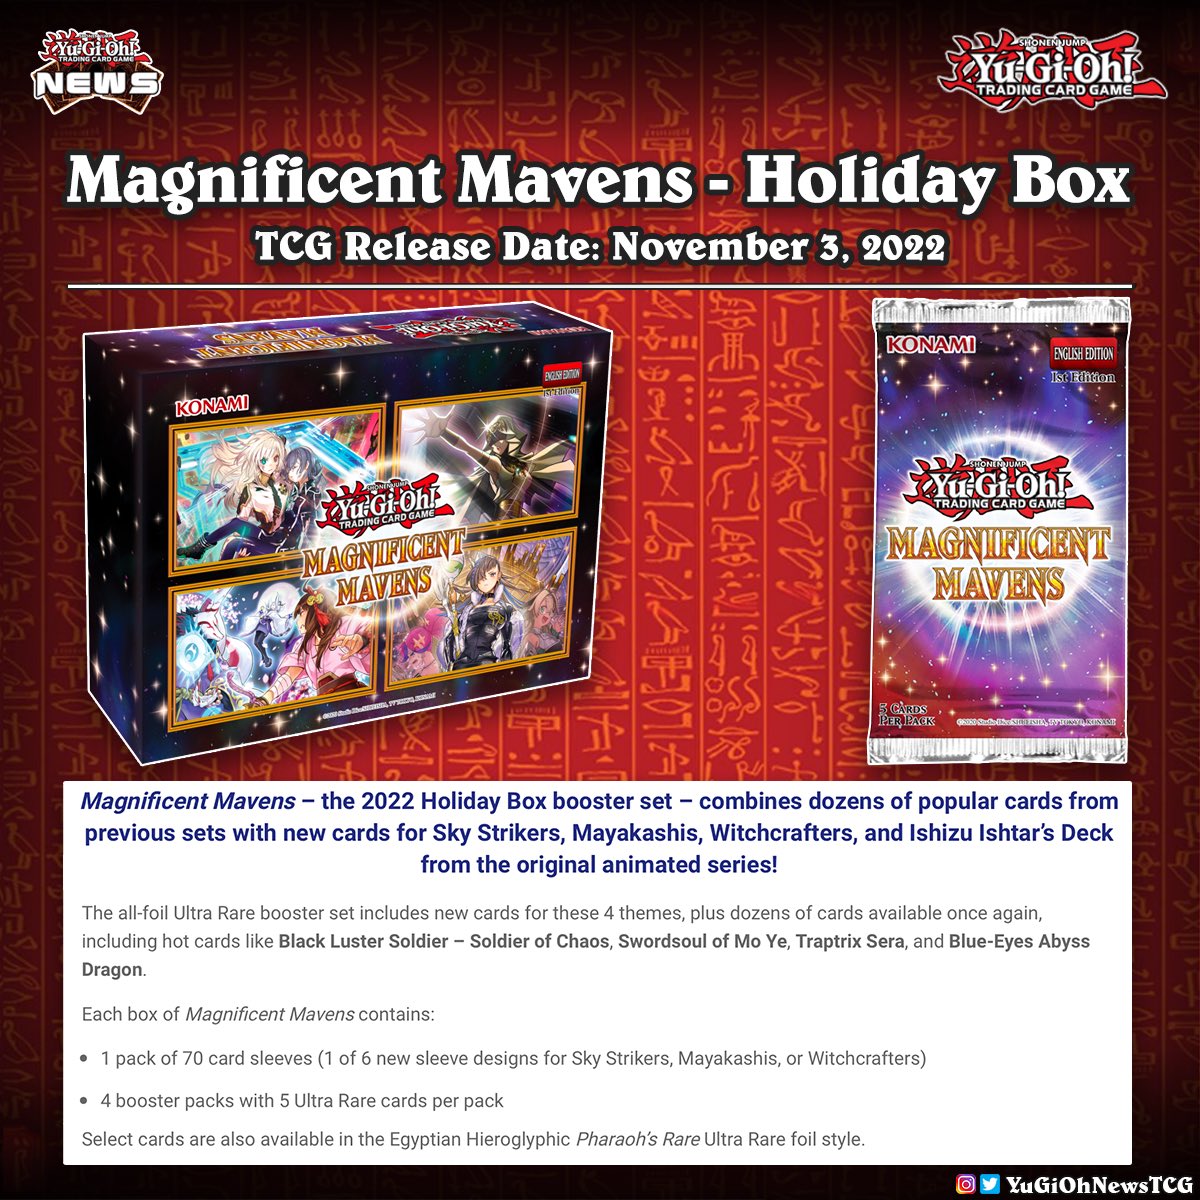 ❰𝗠𝗮𝗴𝗻𝗶𝗳𝗶𝗰𝗲𝗻𝘁 𝗠𝗮𝘃𝗲𝗻𝘀❱The TCG version of the OCG “Secret Shiny Box” has been anno...